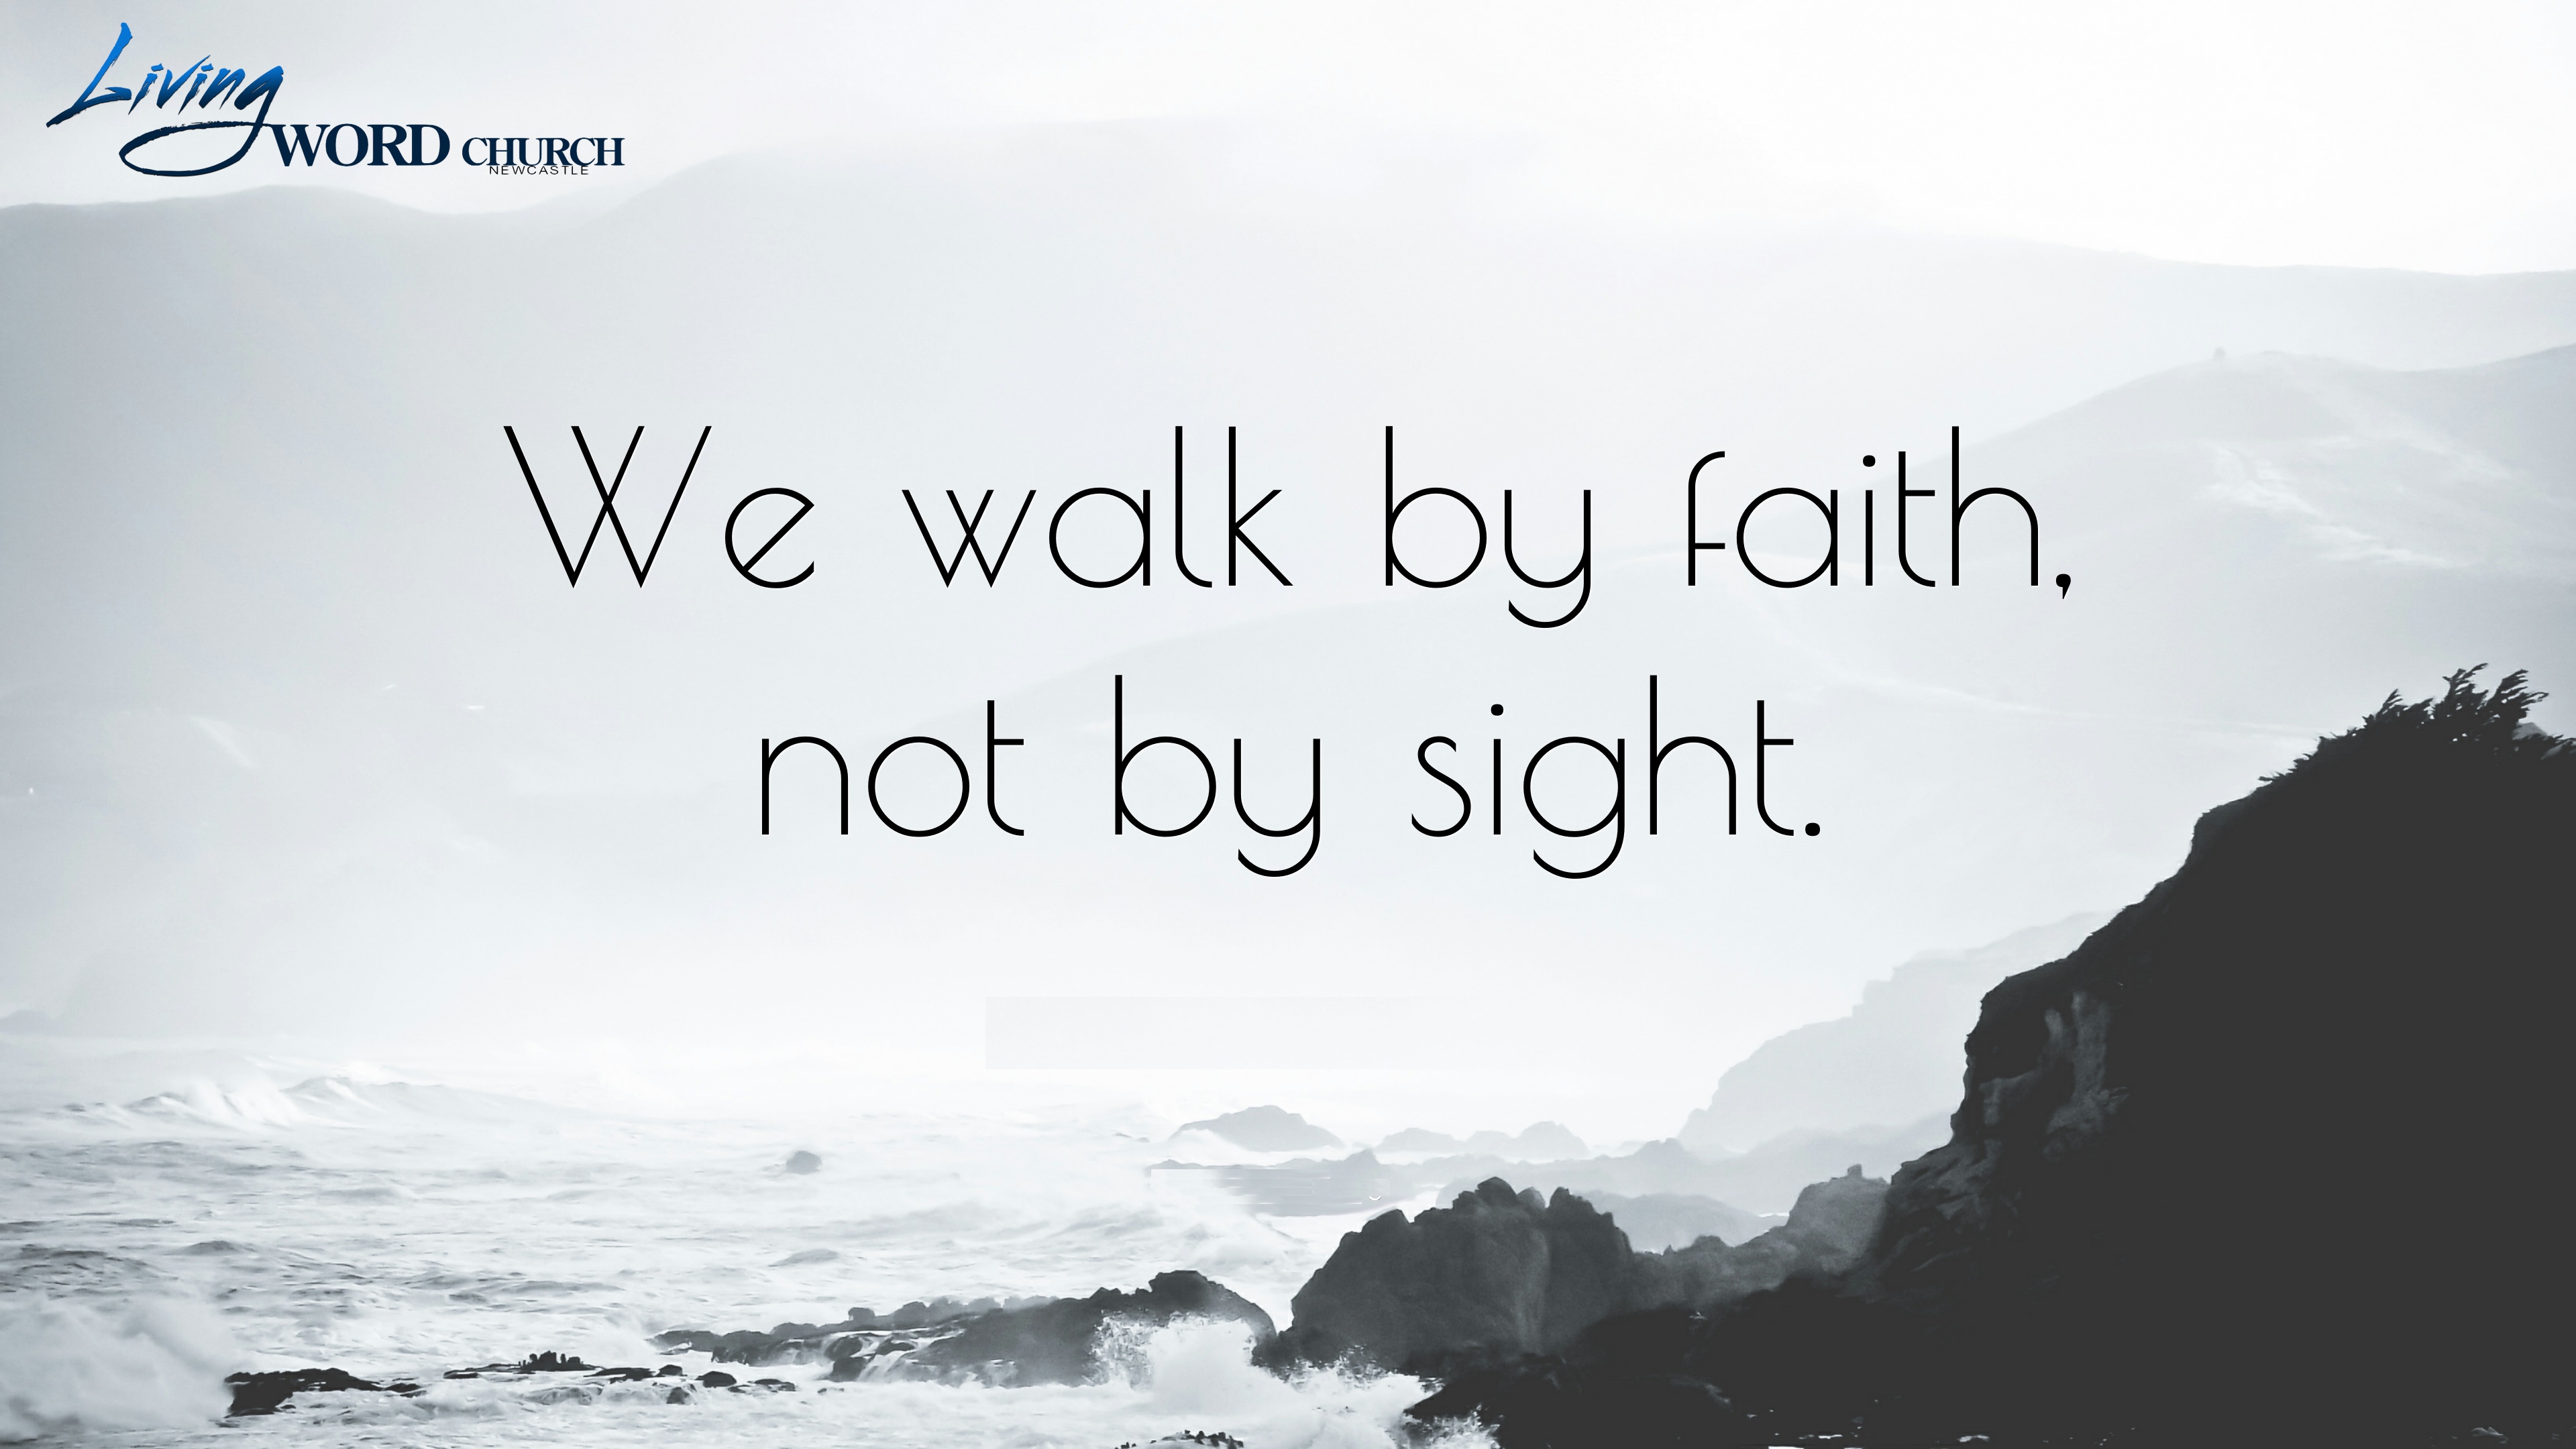 We Walk by Faith and Not by Sight